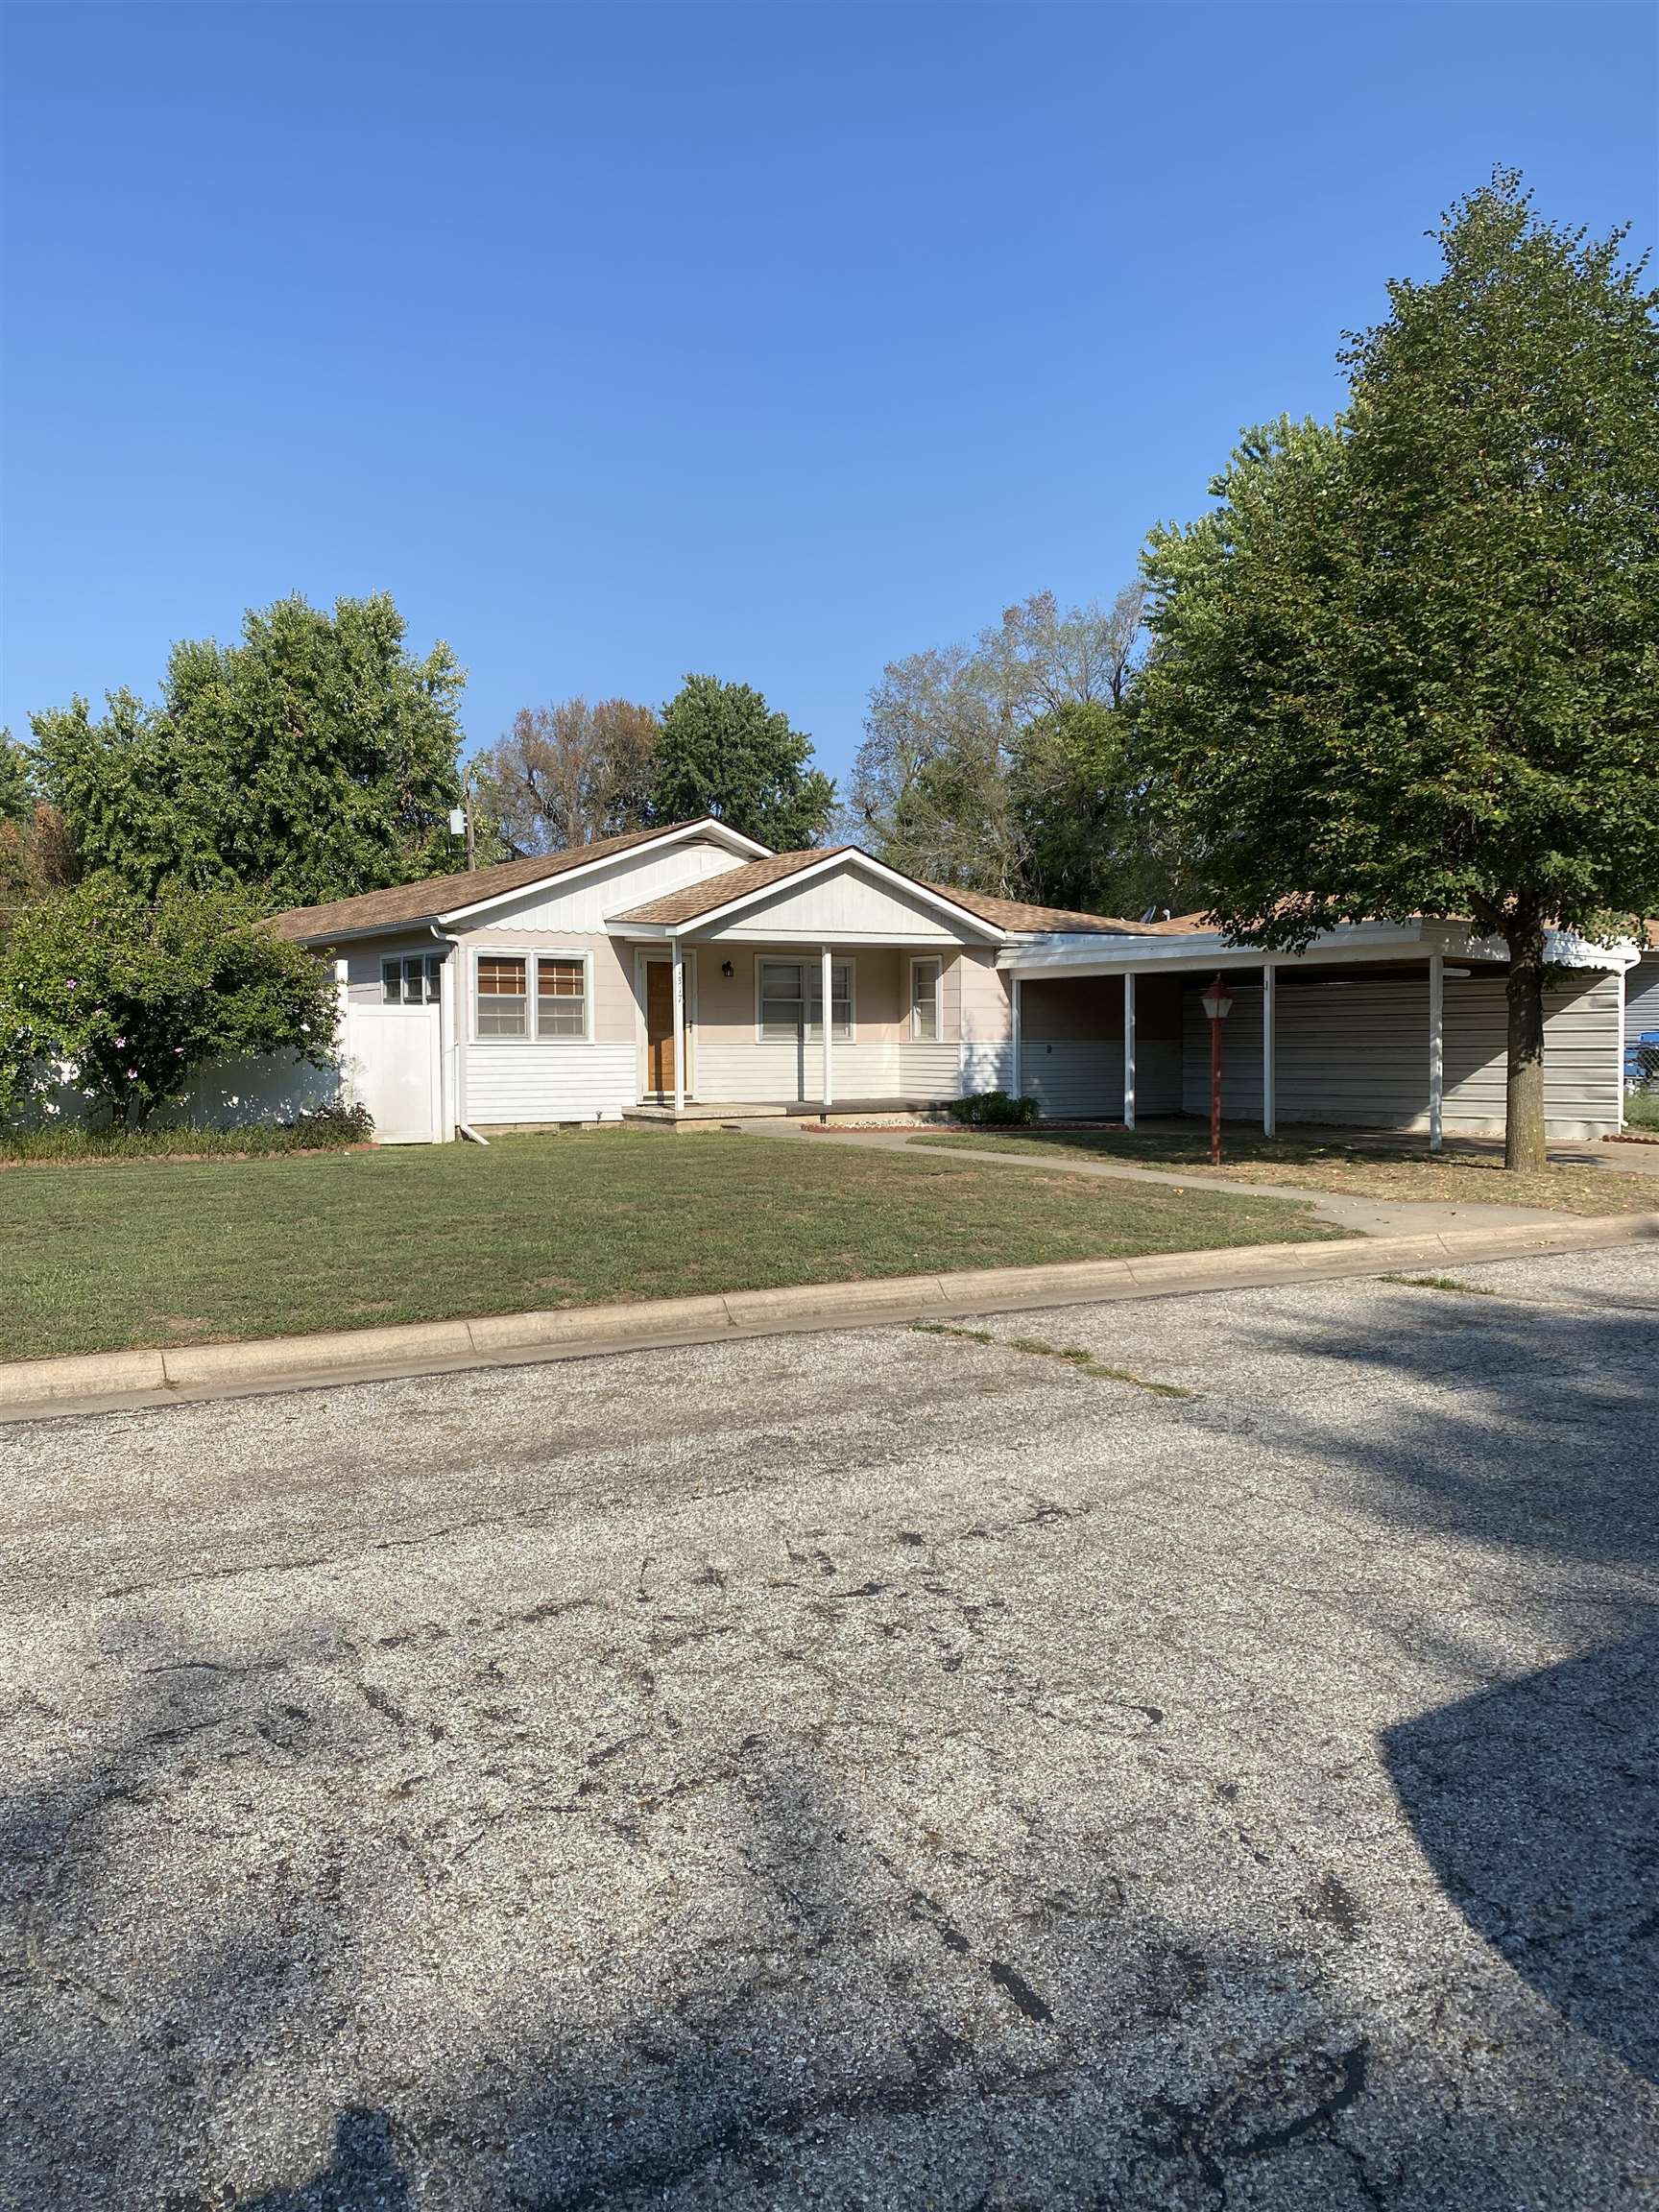 This home boasts three bedrooms, two bathrooms, an office(or extra bedroom)a huge family room with access to the patio via French doors and laundry room off the kitchen. The roof of this house is about 5 years old. The MAN CAVE to the back of the property has electricity and gas and is a 16x20 building just ready for HIM!! Located on a quiet street on a double lot!! Selling the property in present and existing condition with warranties expressed or implied by Seller or Listing Agent. Do not miss out on this well maintained home and make it yours today!!! Call listing agent for a private showing!